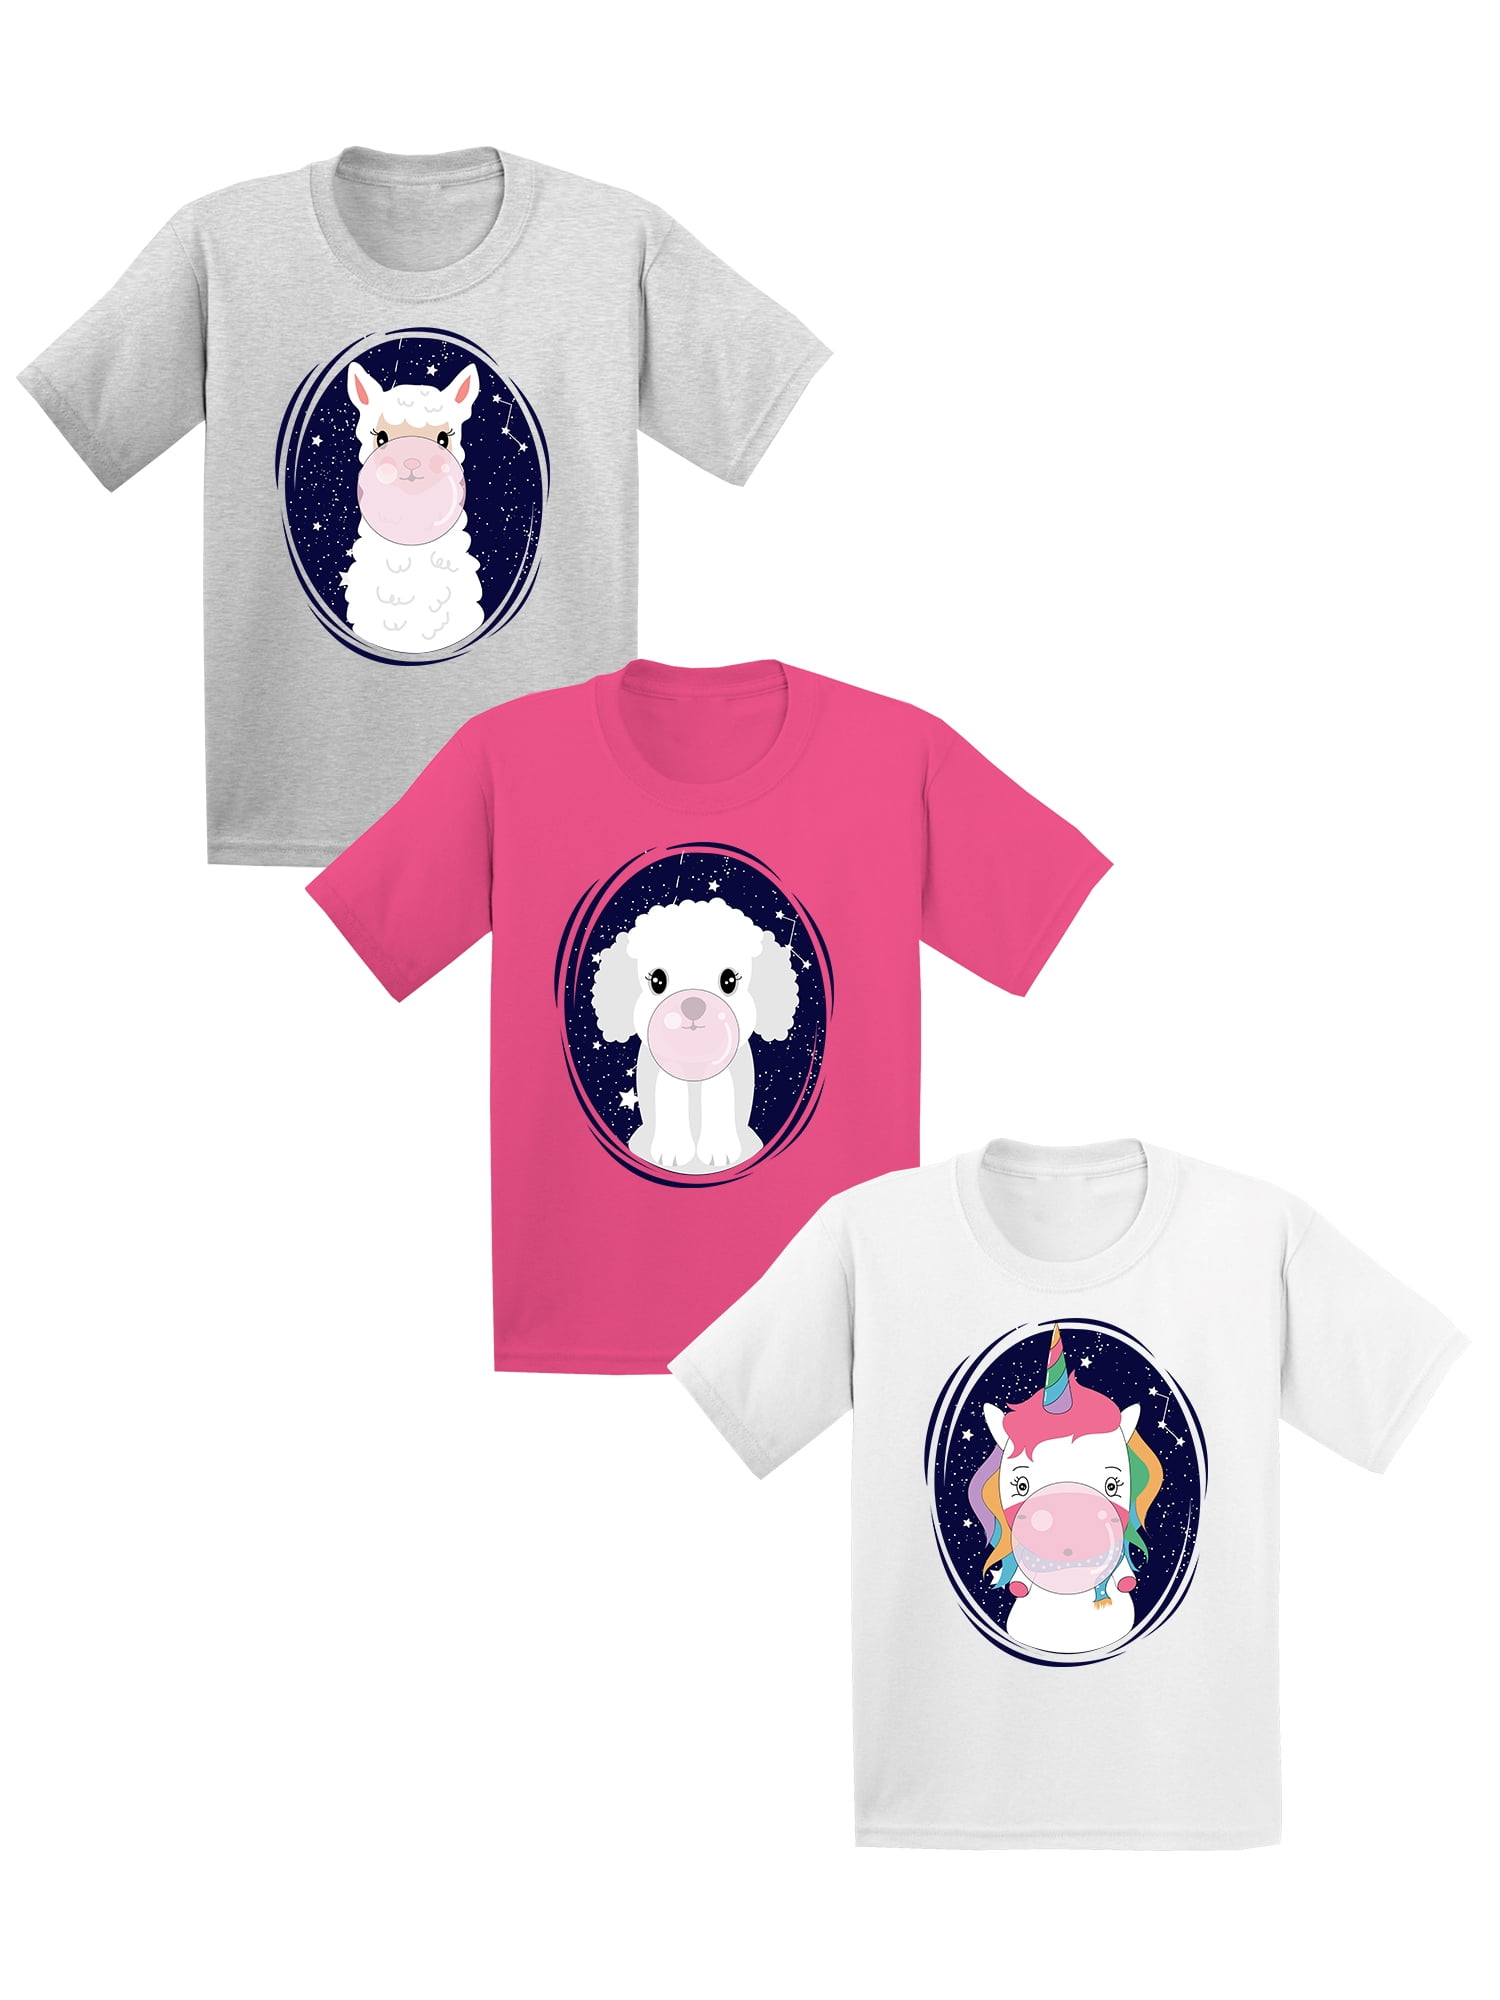 Unicorn Cartoon T Shirt Birthday Gift Number Clothes Graphic Kids  Boys&Girls Clothes Children Tops Short Sleeved